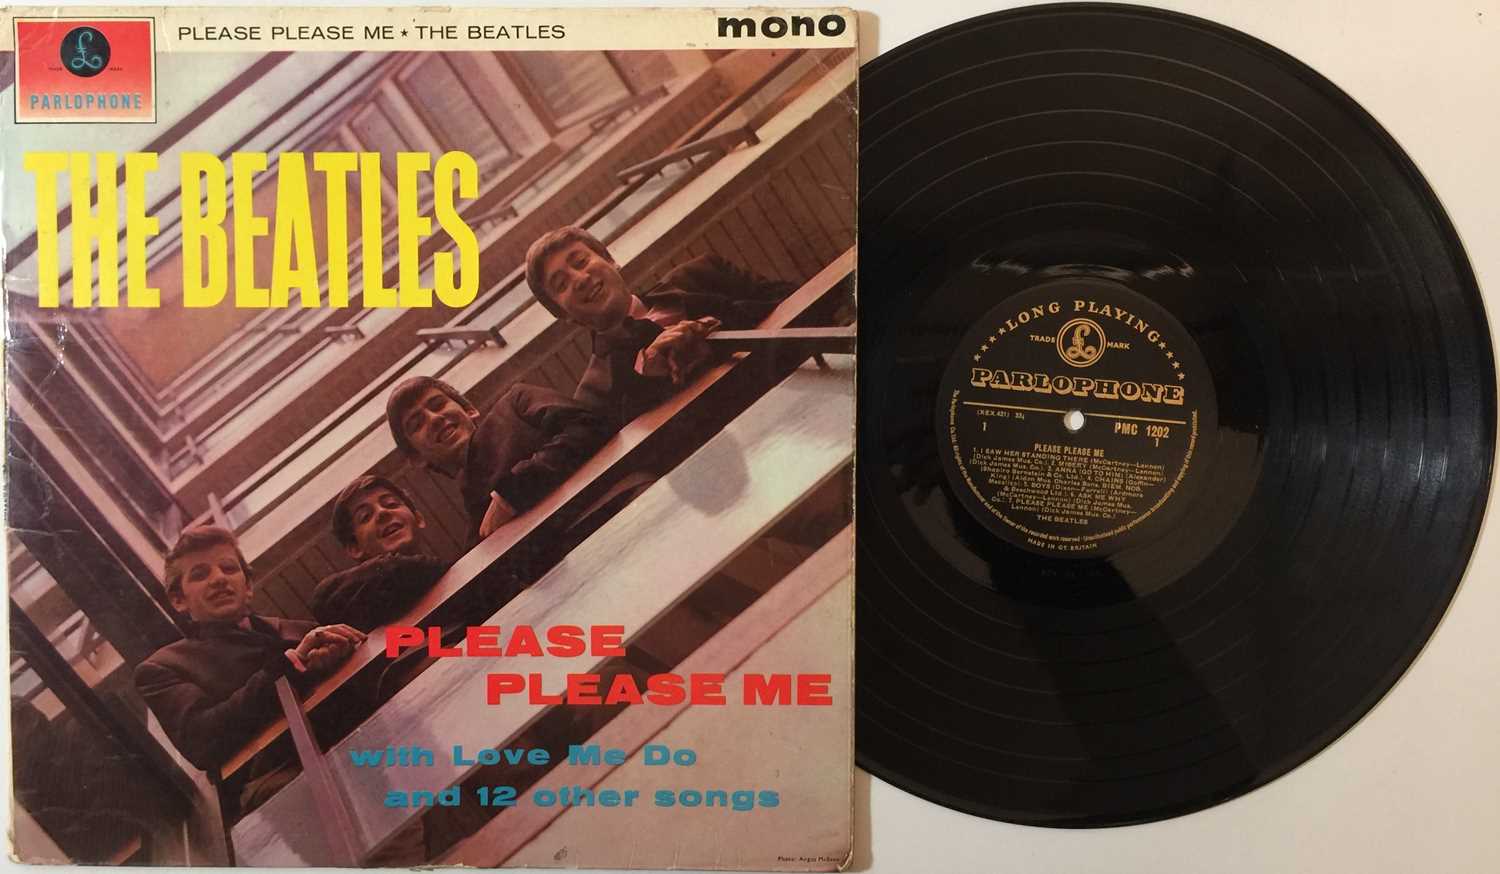 THE BEATLES - PLEASE PLEASE ME (MONO 'BLACK AND GOLD' ORIGINAL PMC 1202 - SOLID EXAMPLE)